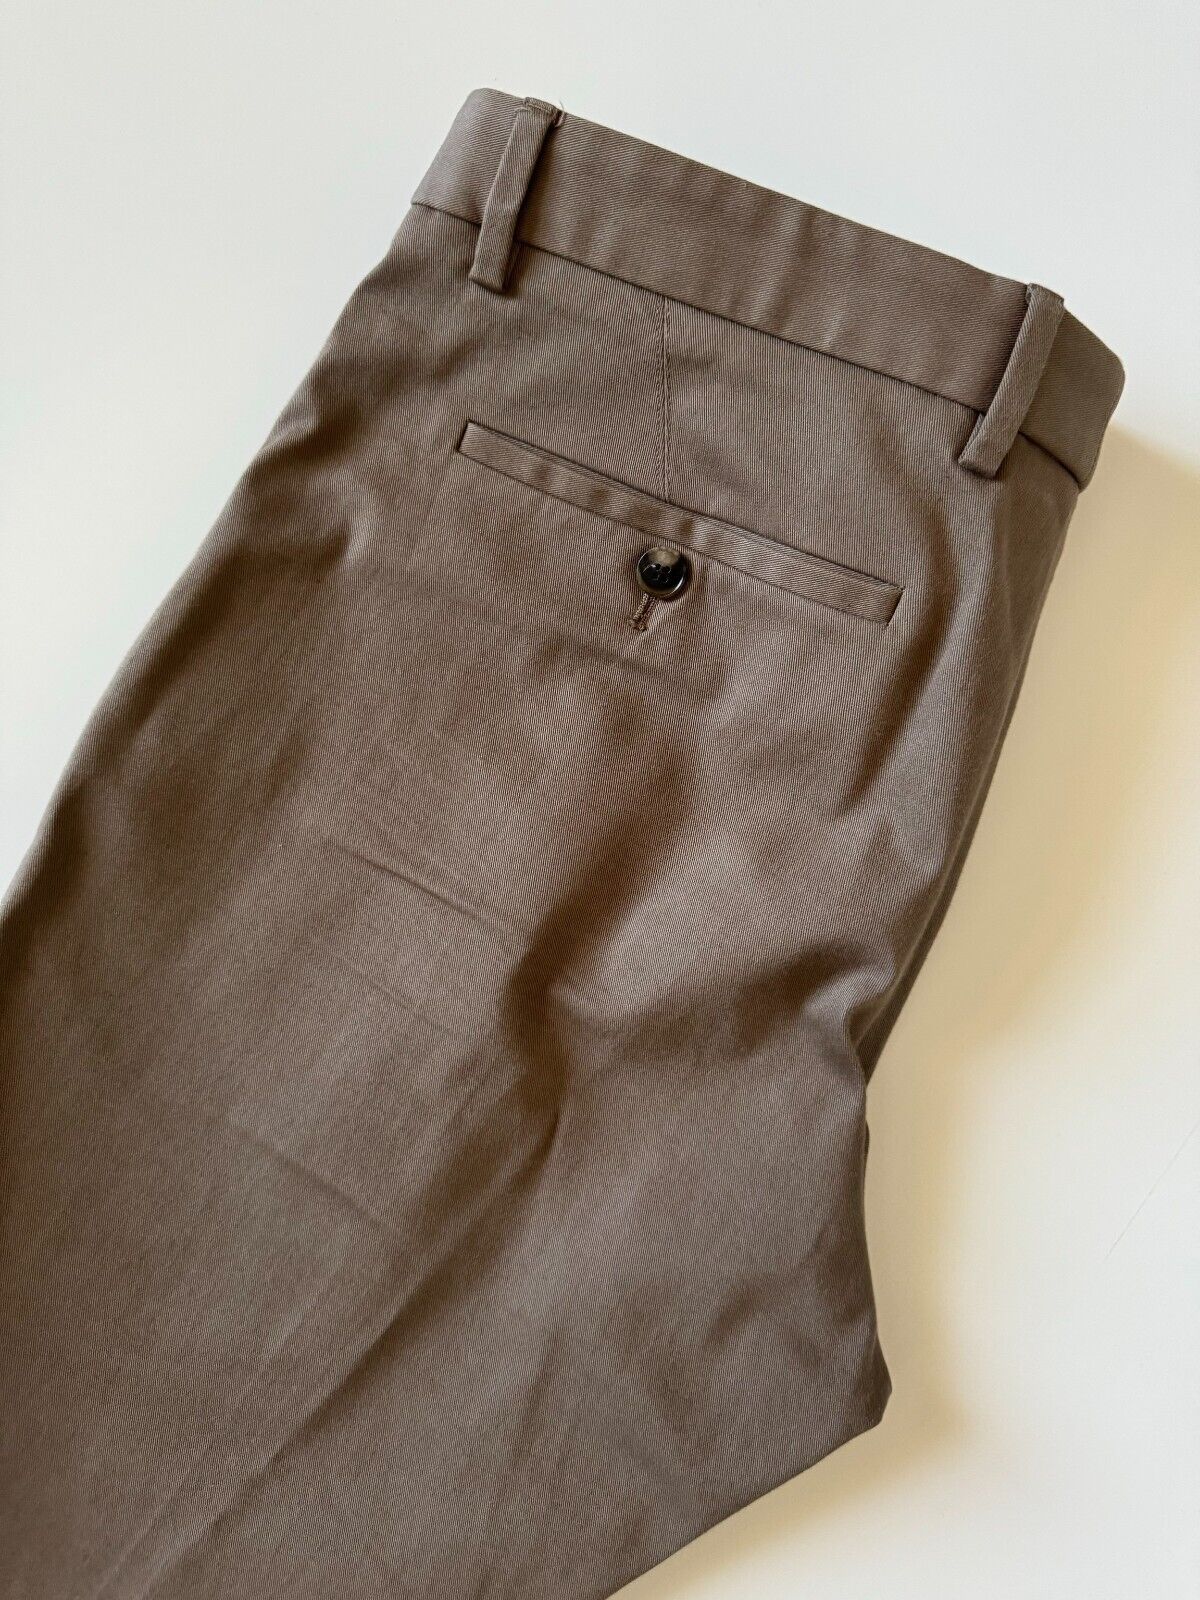 Gucci Men’s Brown Riding Dress Pants Size 32 US Made in Italy